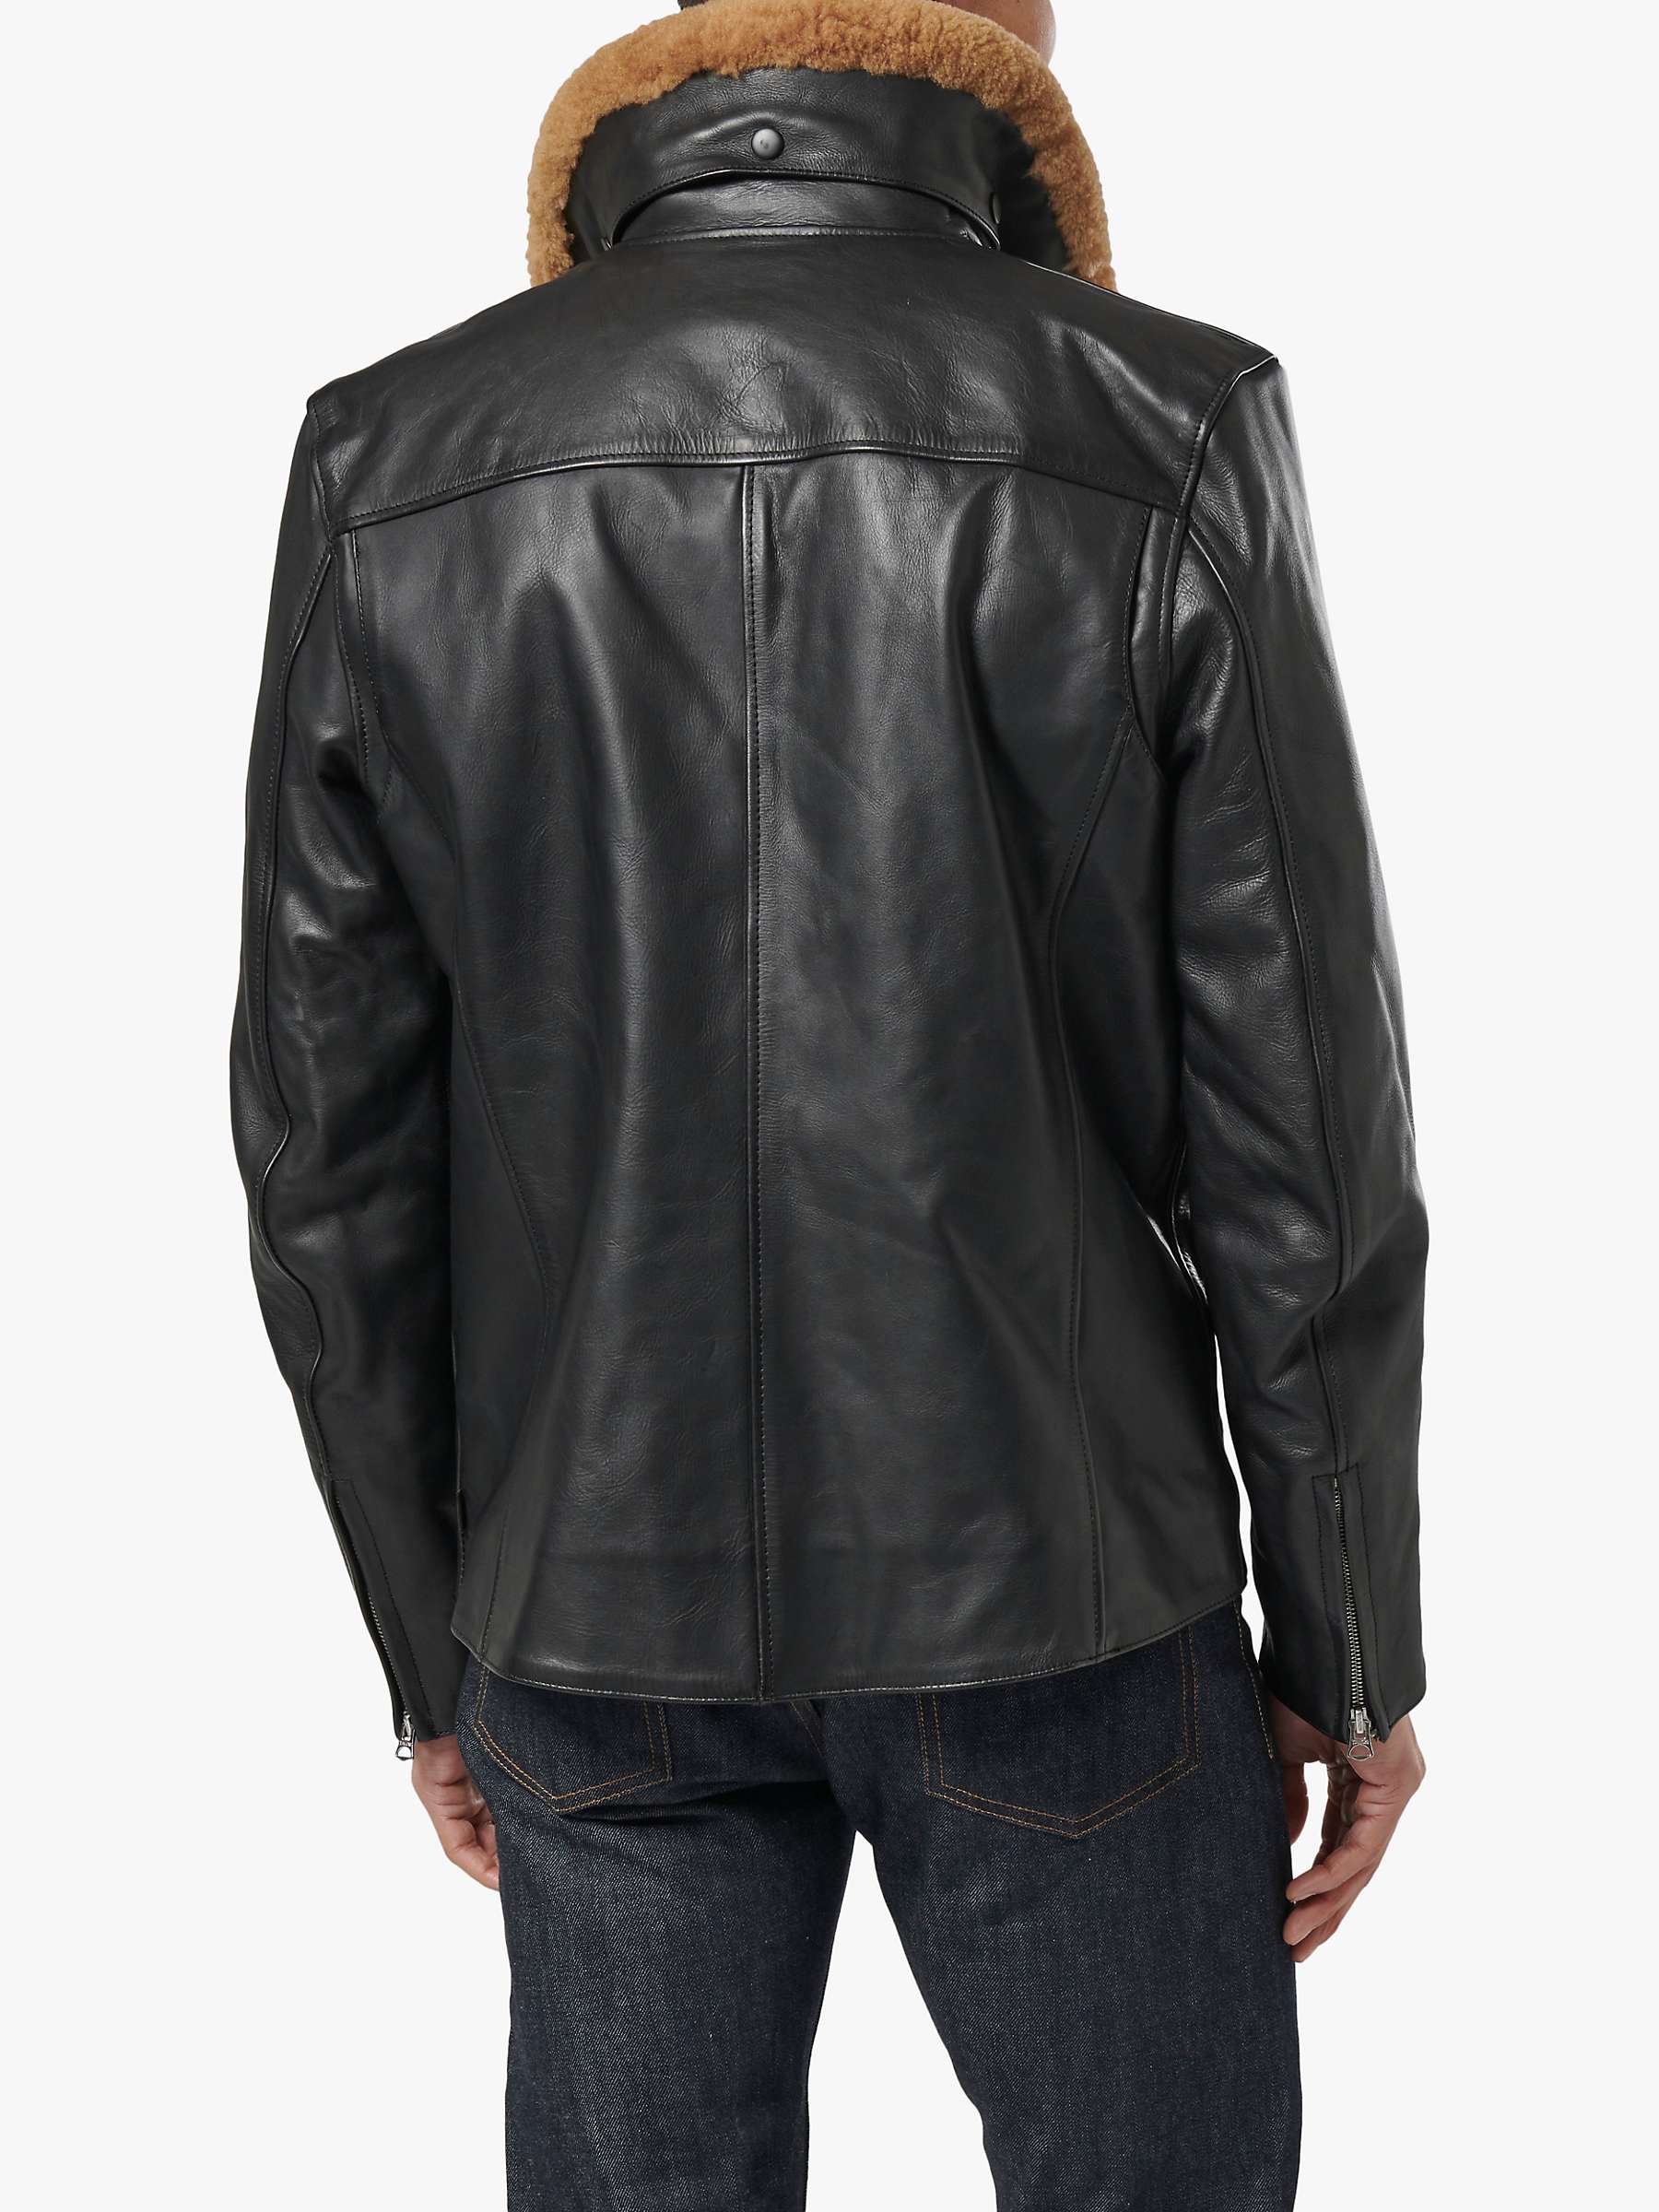 Buy Triumph Motorcycles Rexford Leather Jacket Online at johnlewis.com